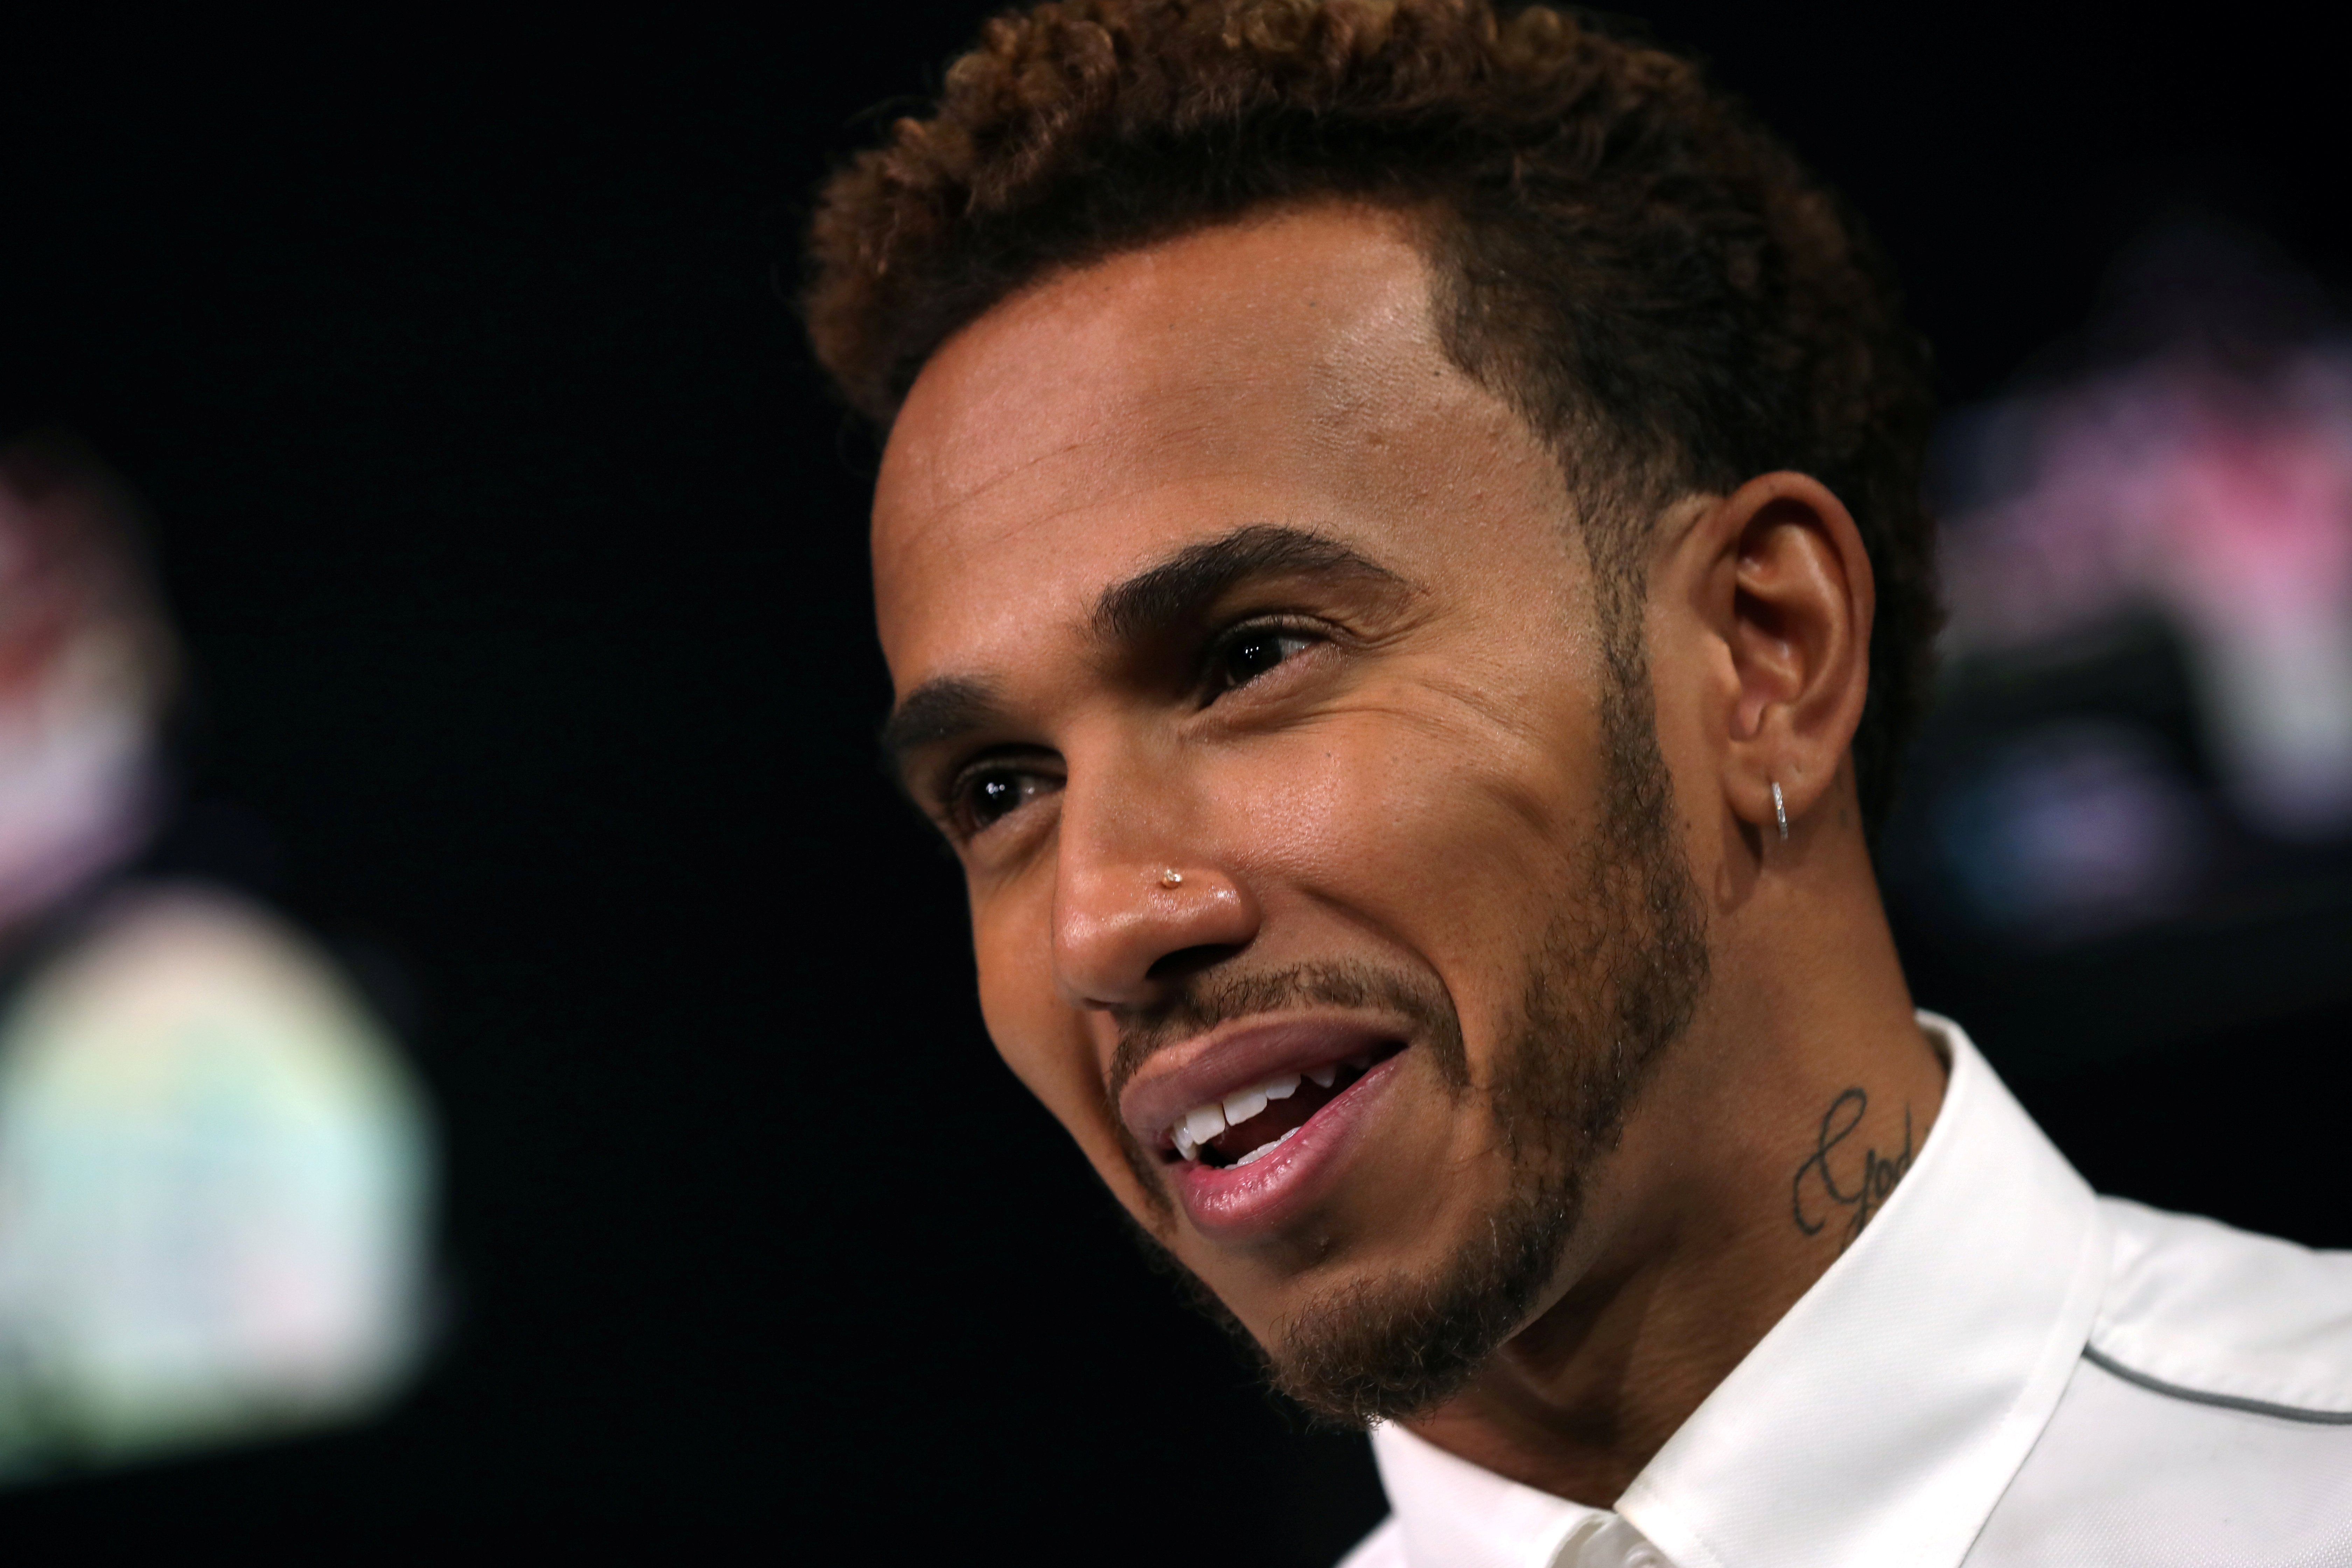 Mercedes' Lewis Hamilton speaks ahead of the United States Grand Prix in New York City